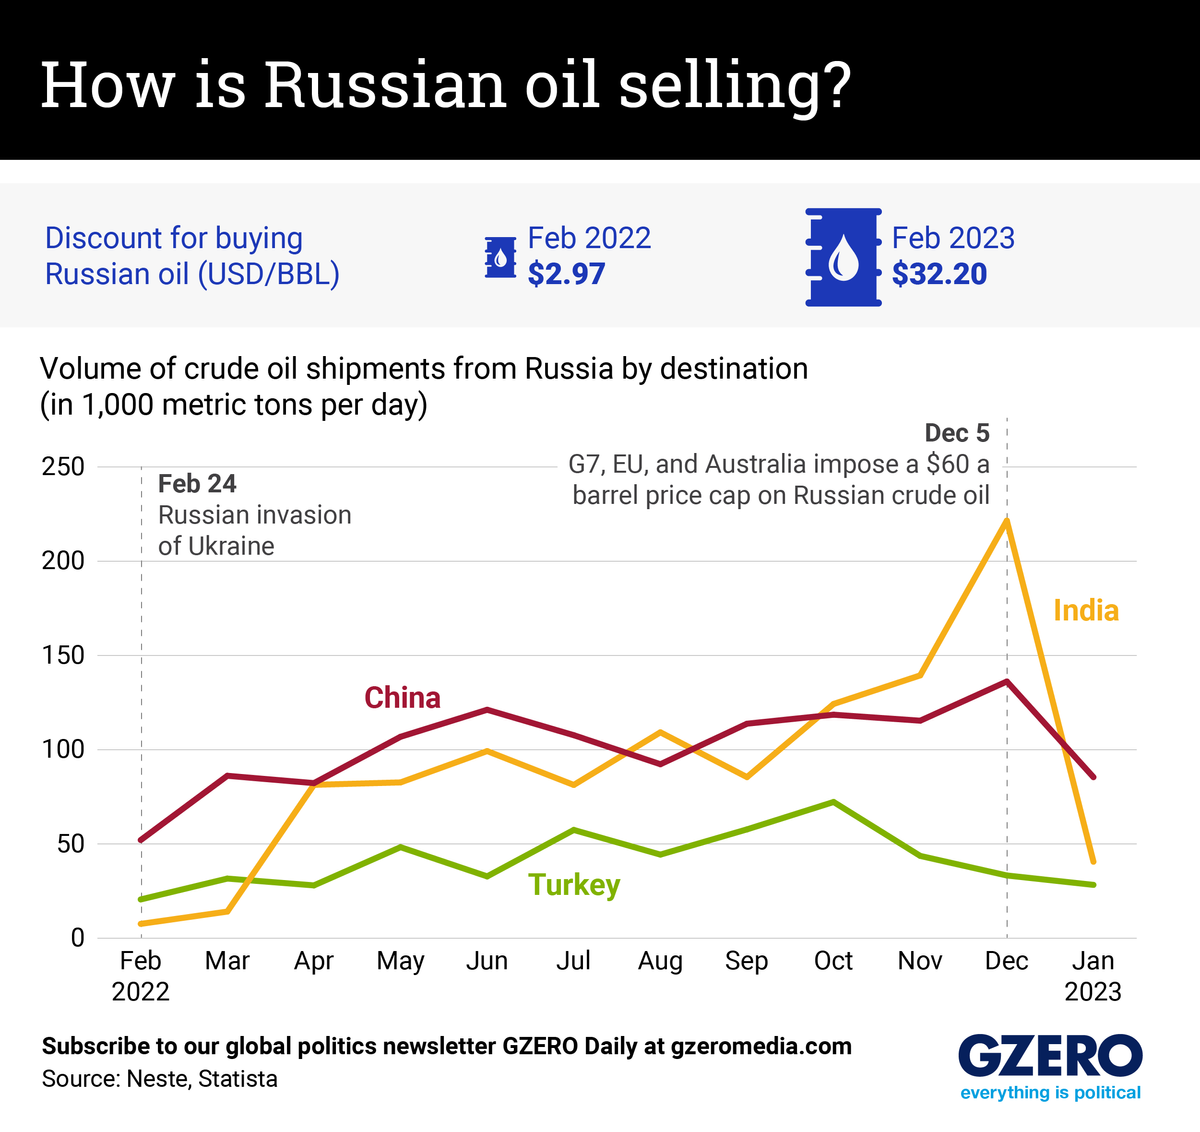 The Graphic Truth: How is Russian oil selling?